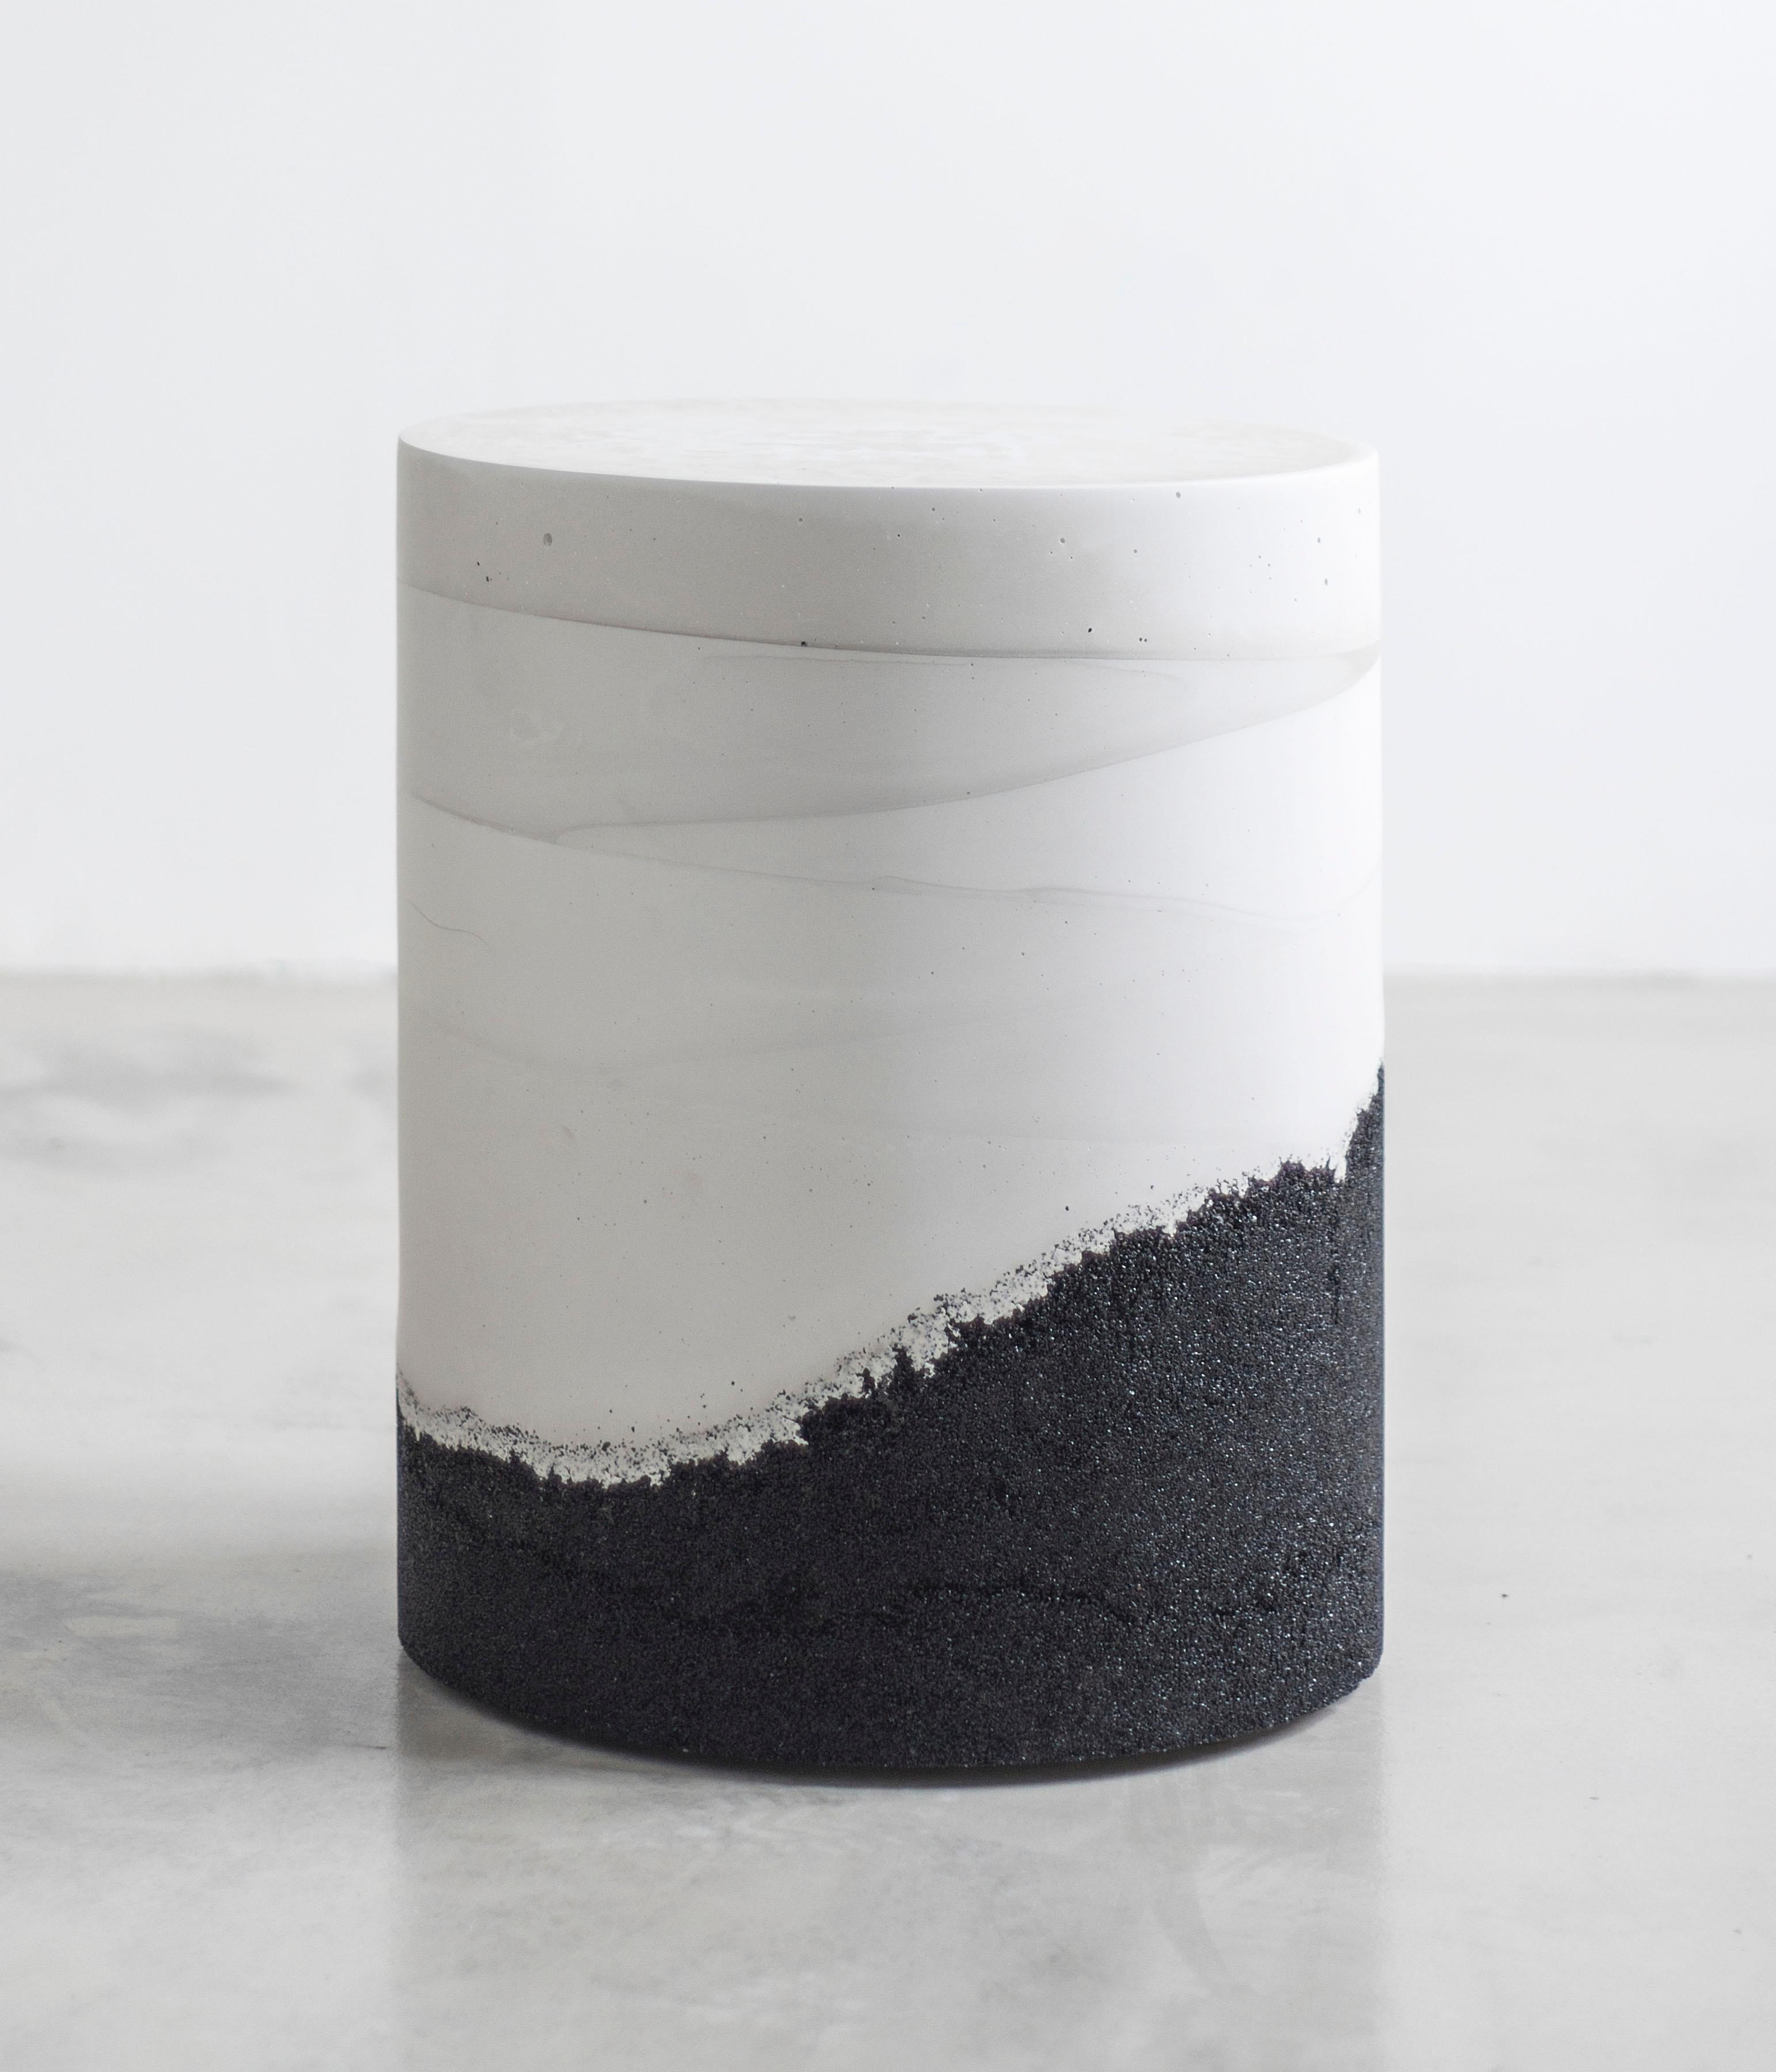 Composed in a language of landscape-oriented abstraction, the made-to-order drum is cast from hand-dyed white cement and black silica. Poured by hand over the black granules, the white cement combines the materials to create an effect evocative of a